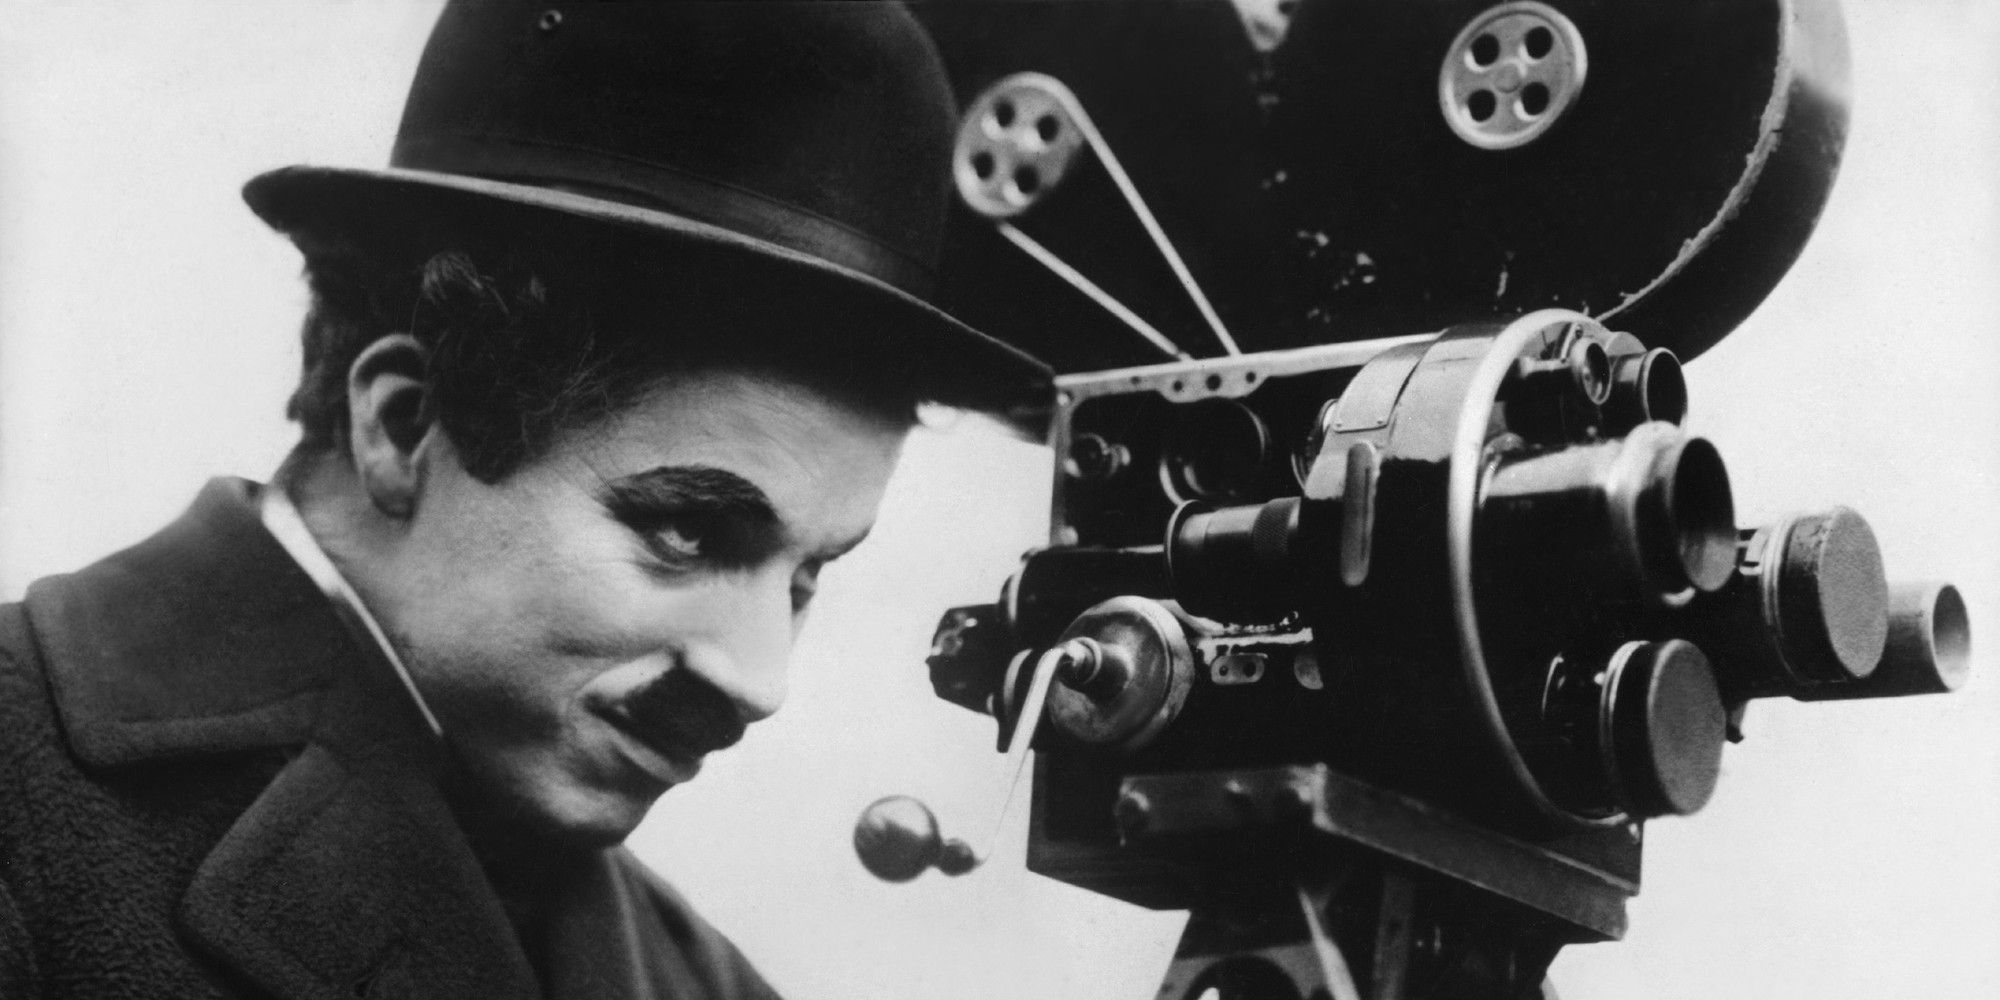 How to Get Charlie Chaplin Look on a Digital Camera